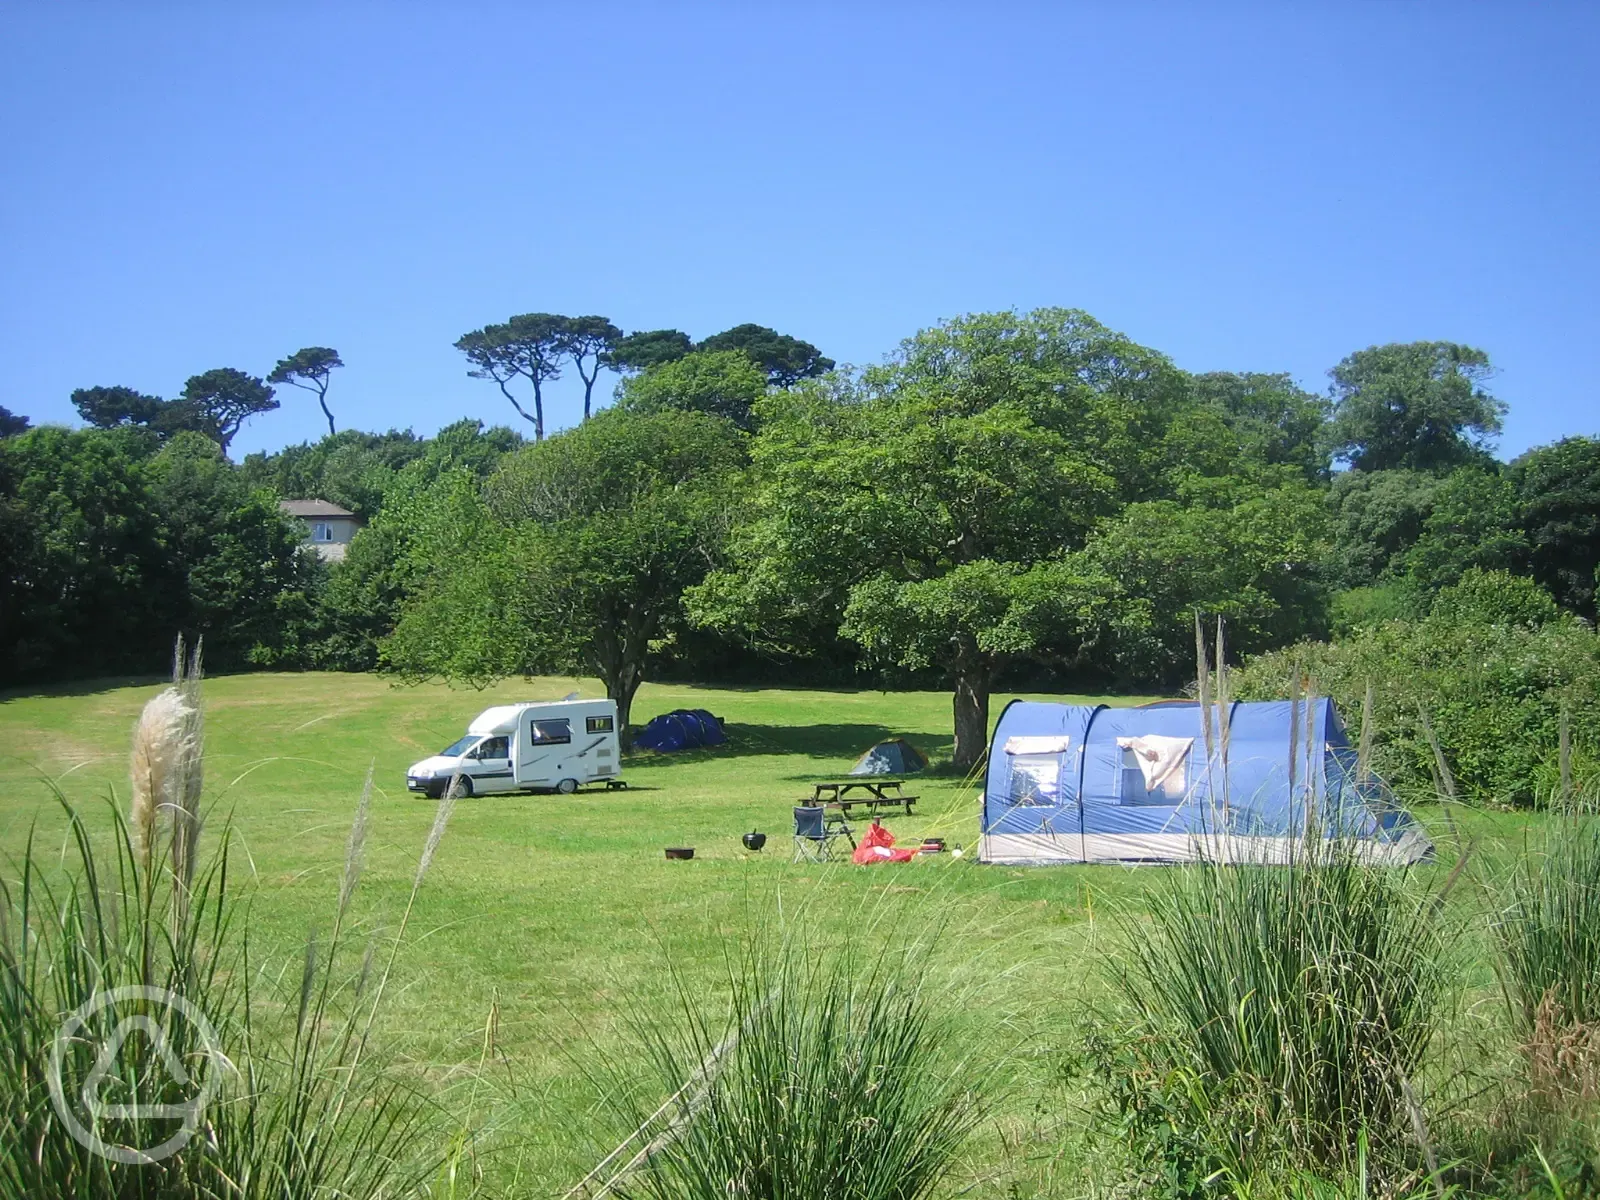 Grass camping and touring pitches